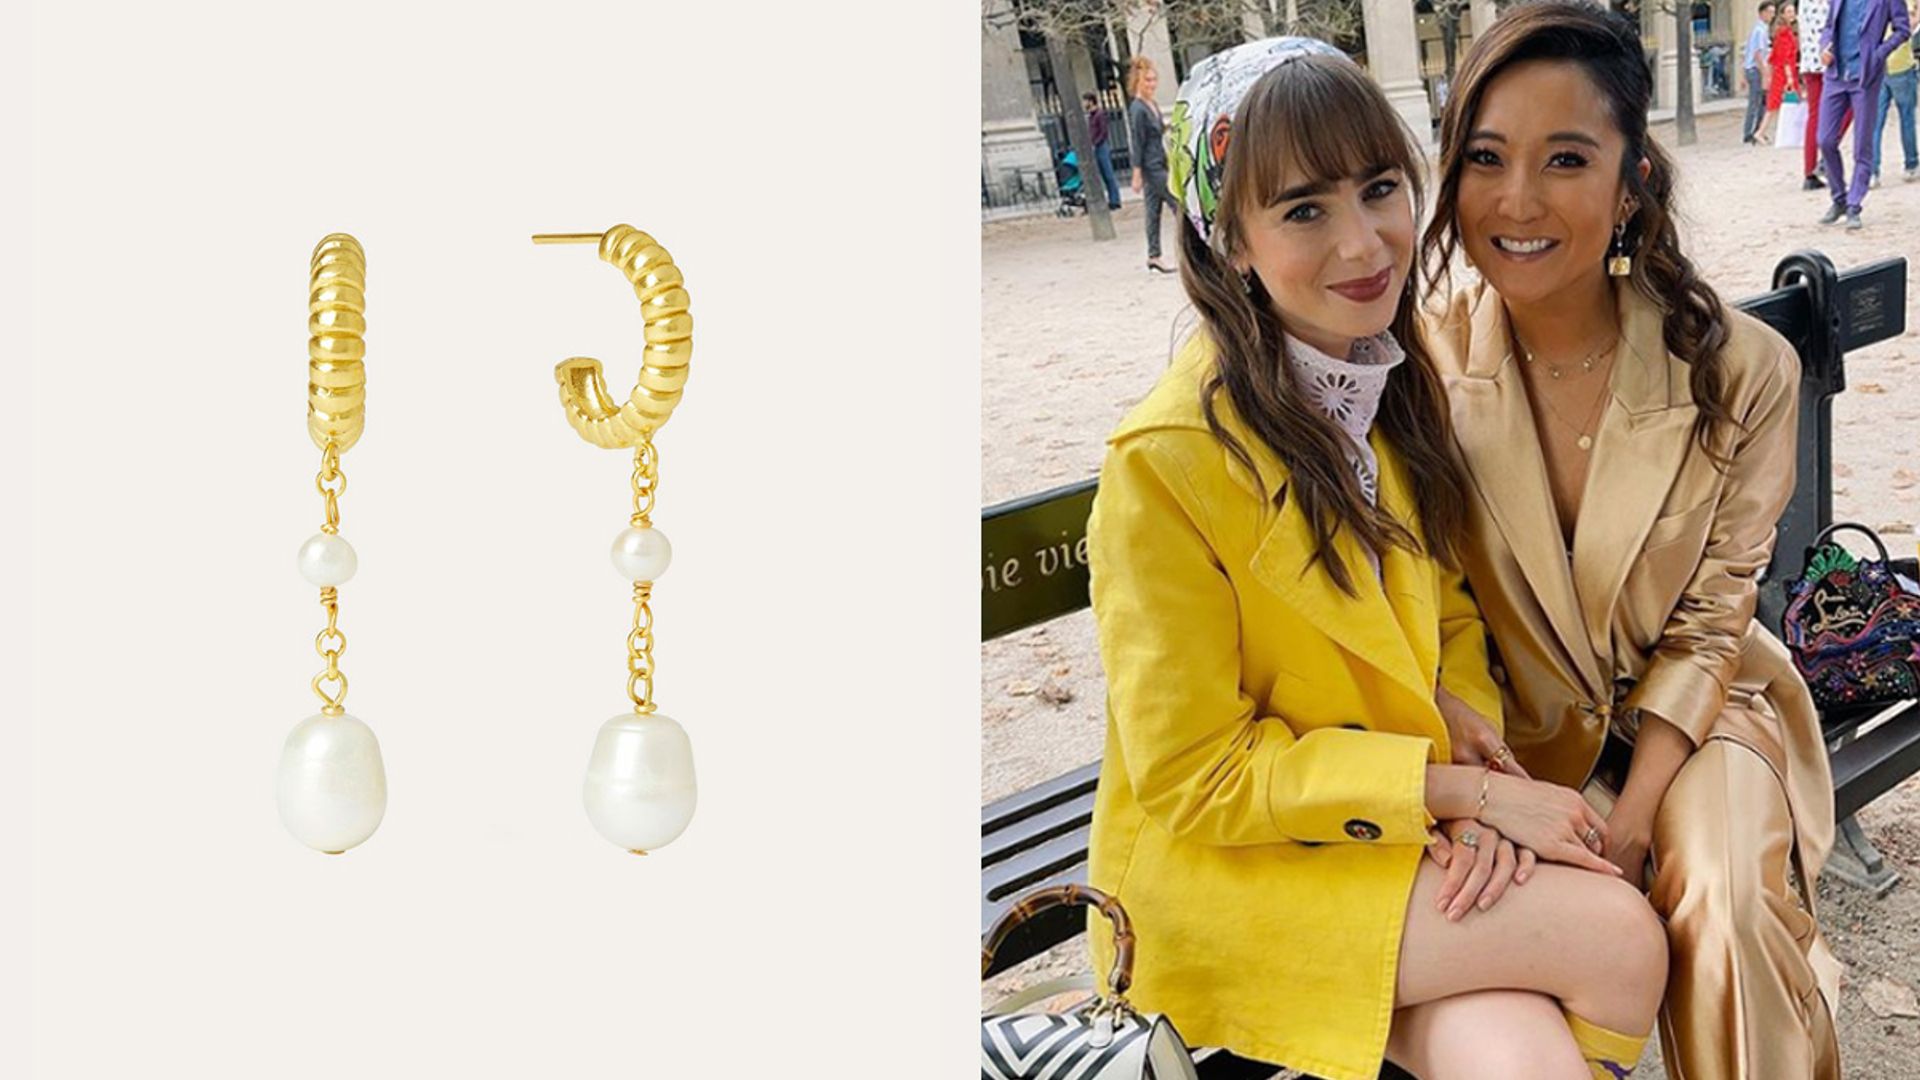 Emily in Paris fan? This is the affordable jewellery brand worn in the show!